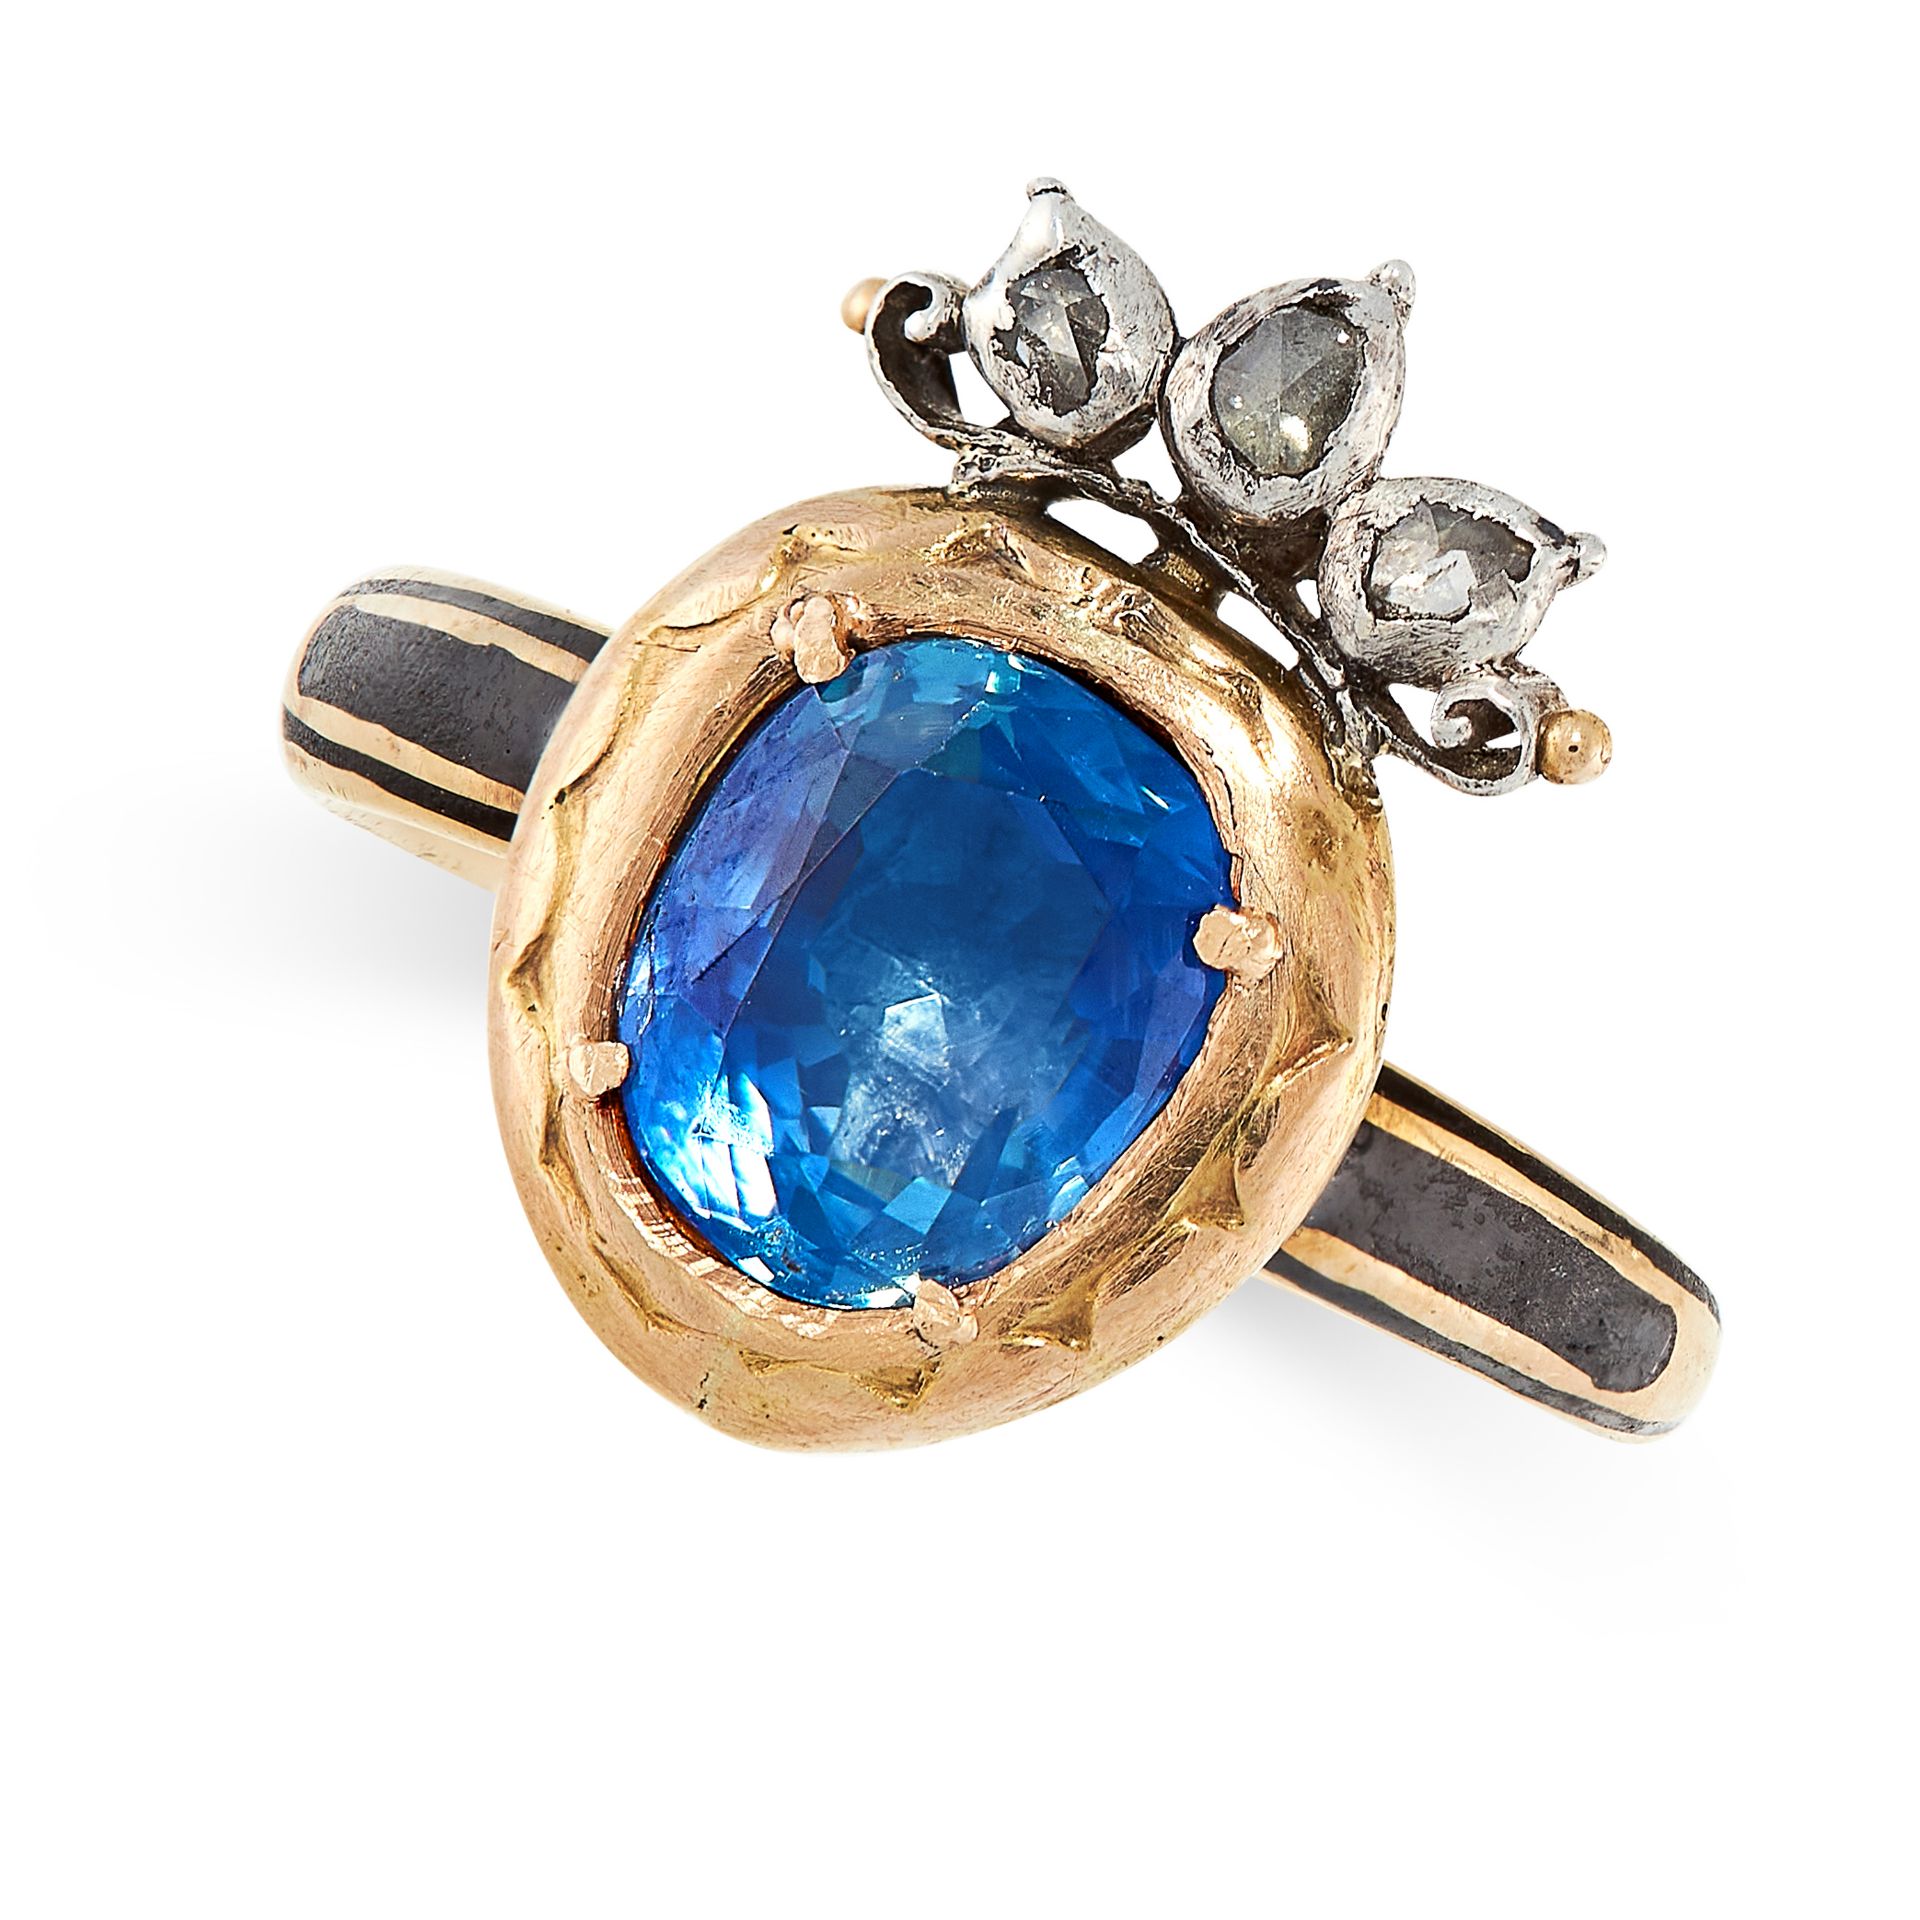 AN ANTIQUE KASHMIR SAPPHIRE, DIAMOND AND ENAMEL SWEETHEART RING, 19TH CENTURY in yellow gold and